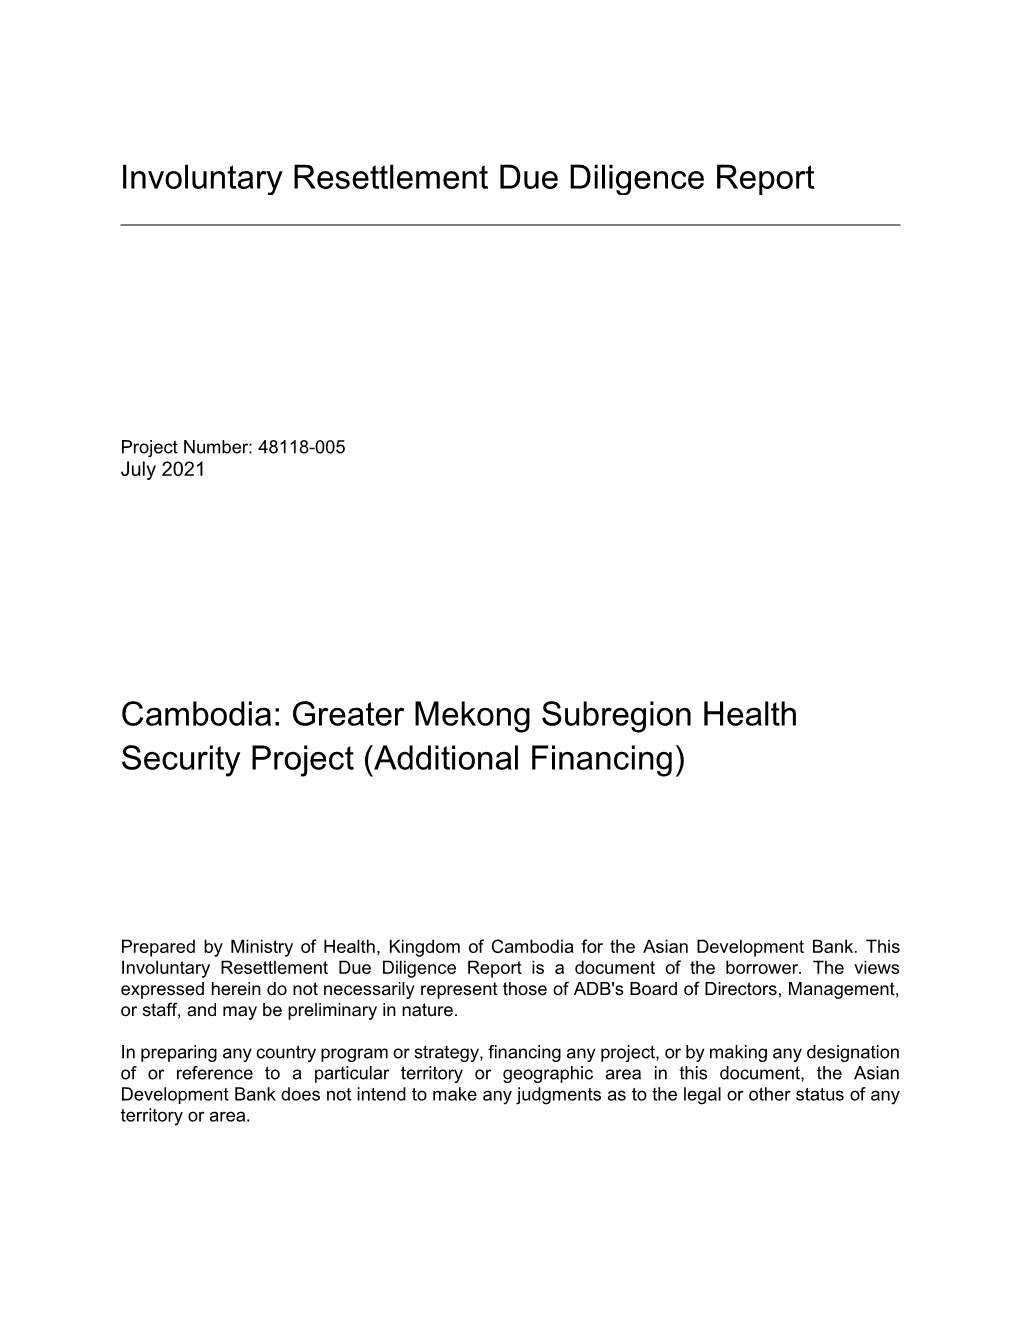 Cambodia: Greater Mekong Subregion Health Security Project (Additional Financing)